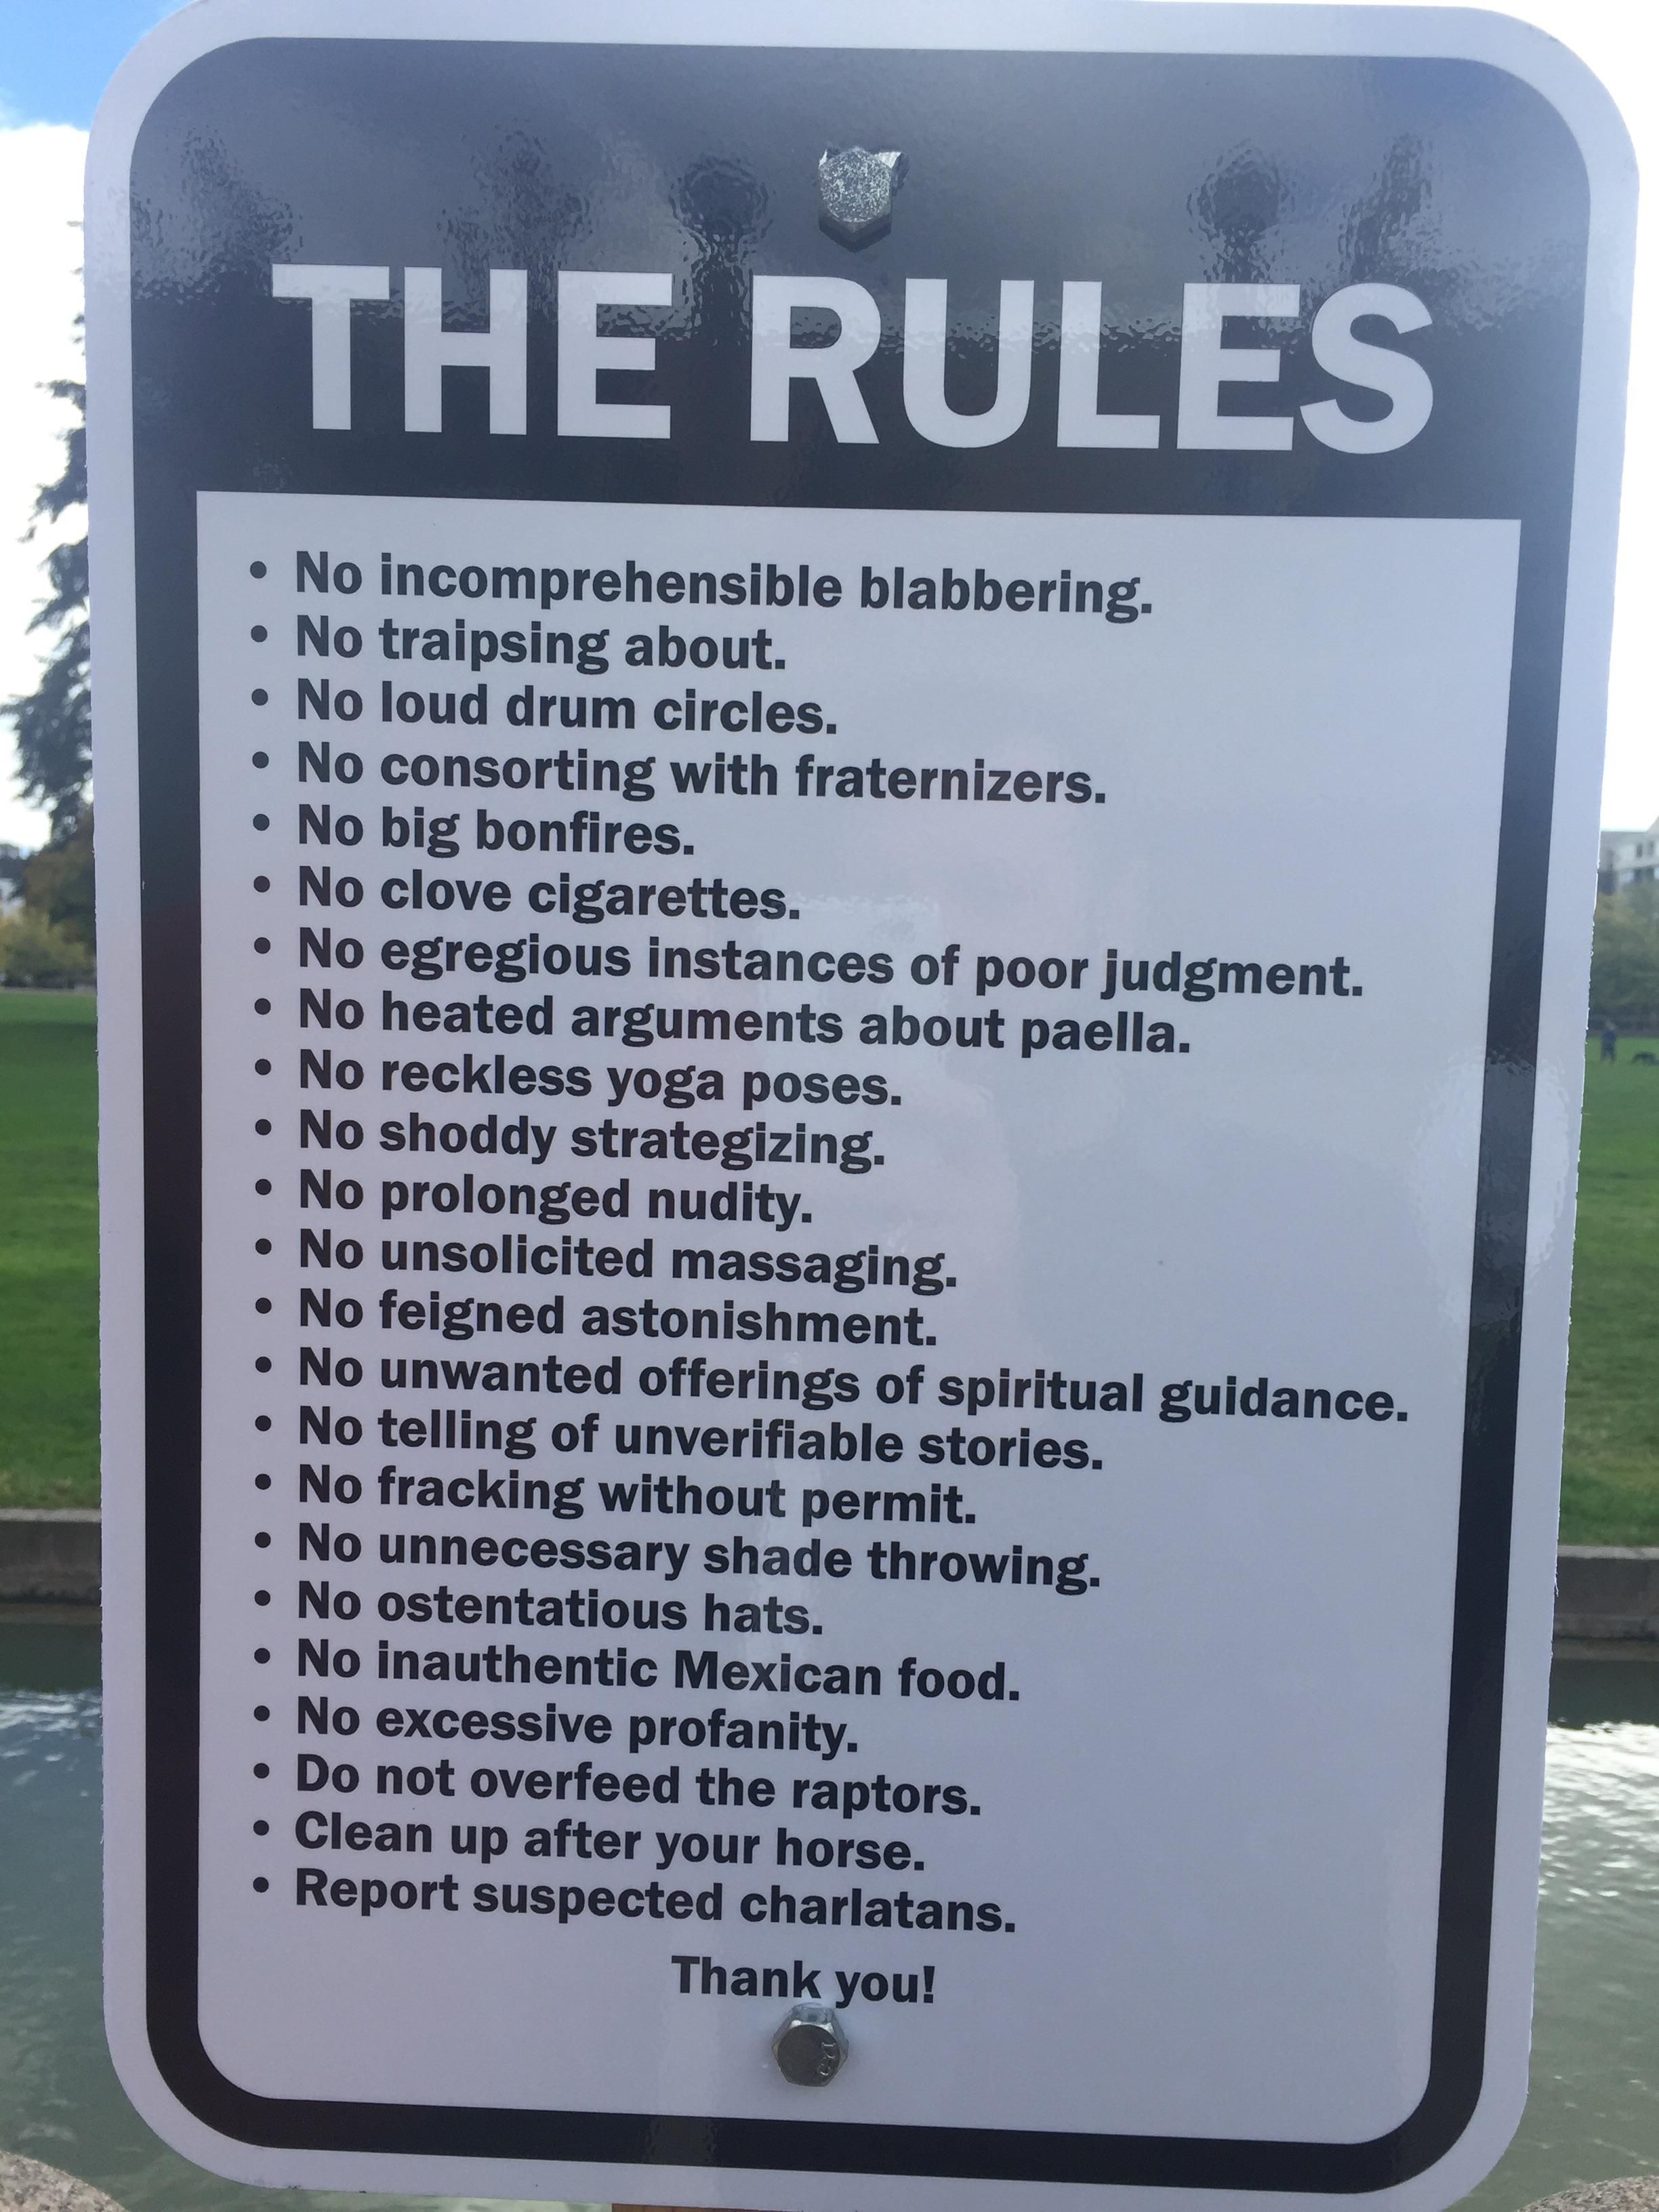 The Rules.